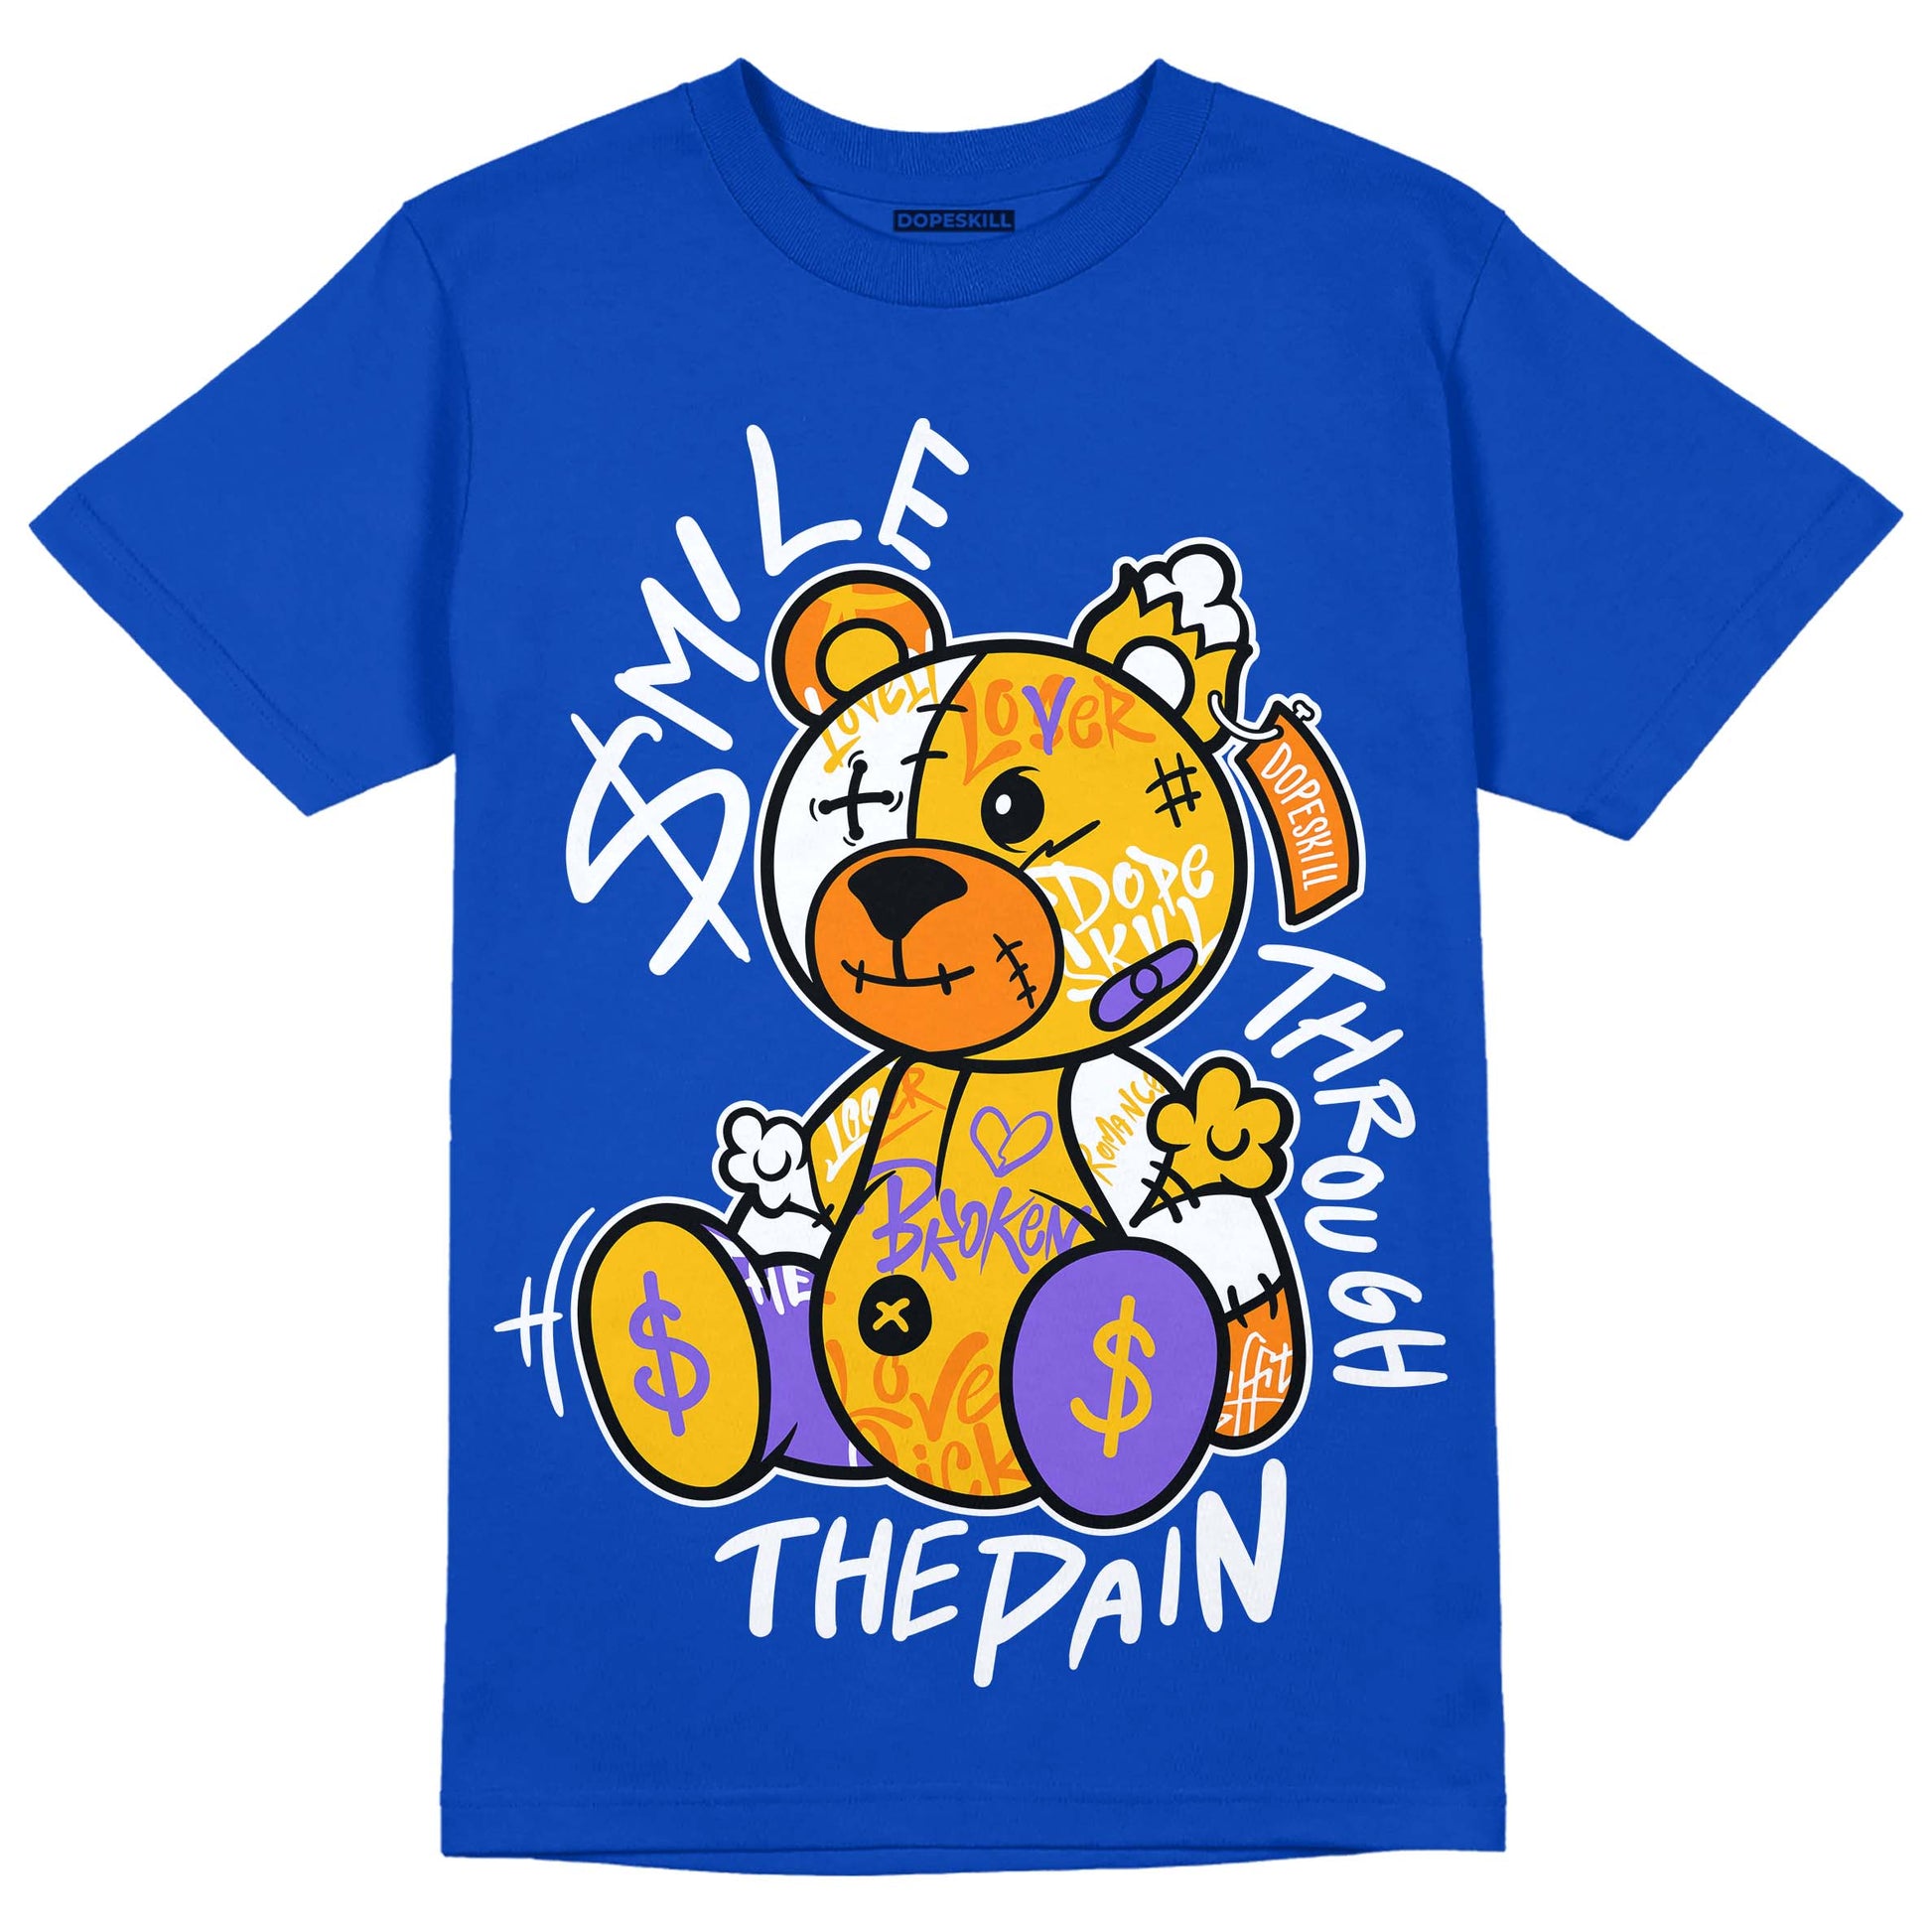 Royal Blue Sneakers DopeSkill Royal Blue T-shirt Smile Through The Pain Graphic Streetwear